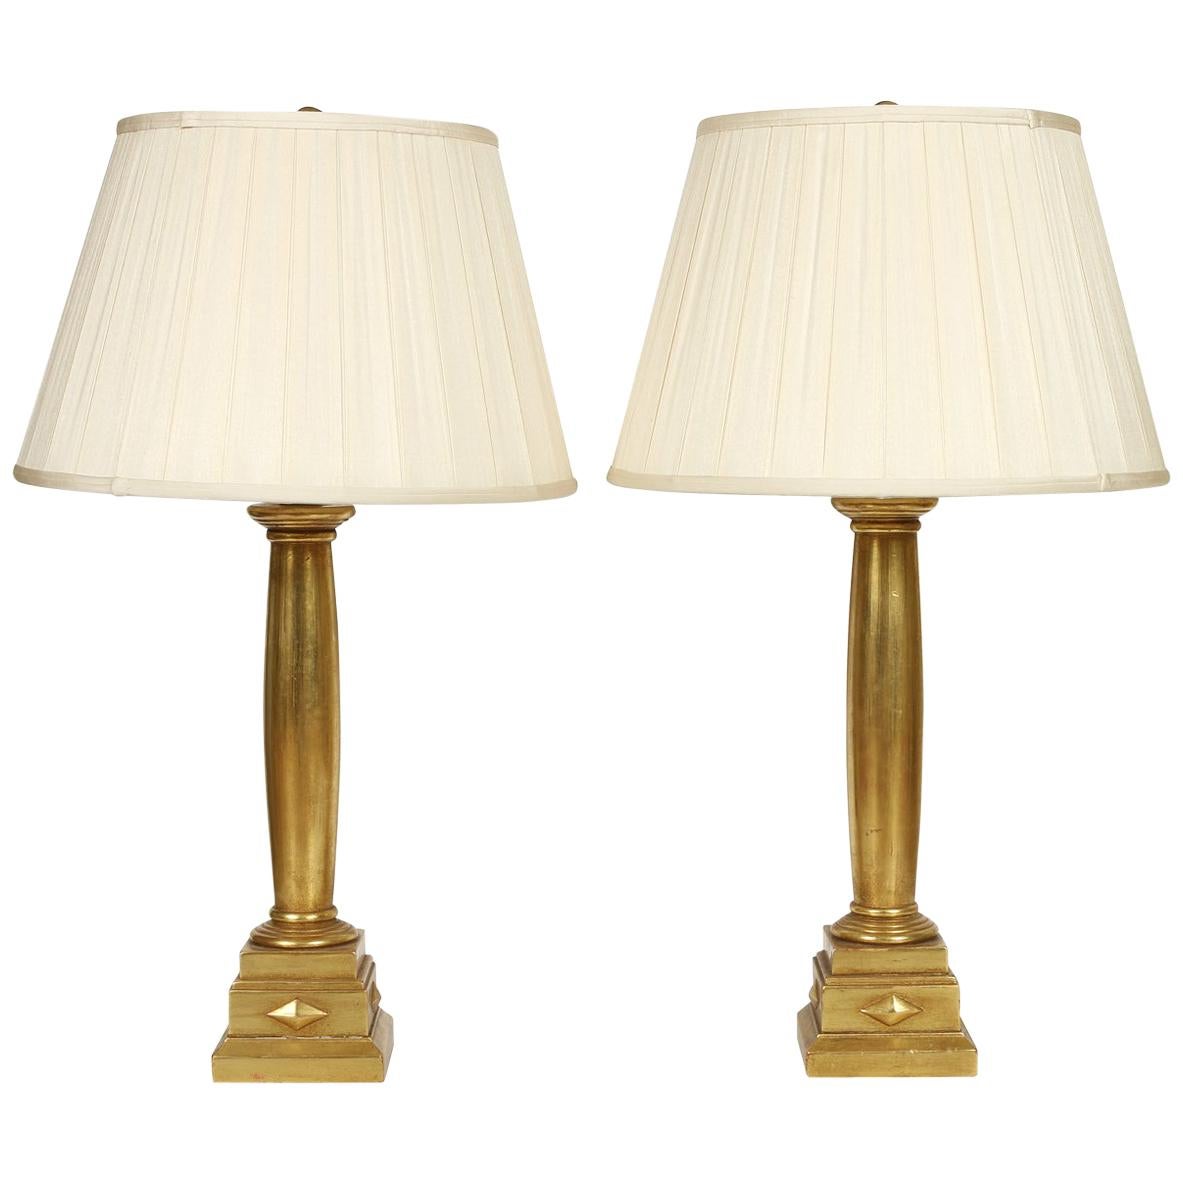 Pair of Giltwood Column Form Lamps